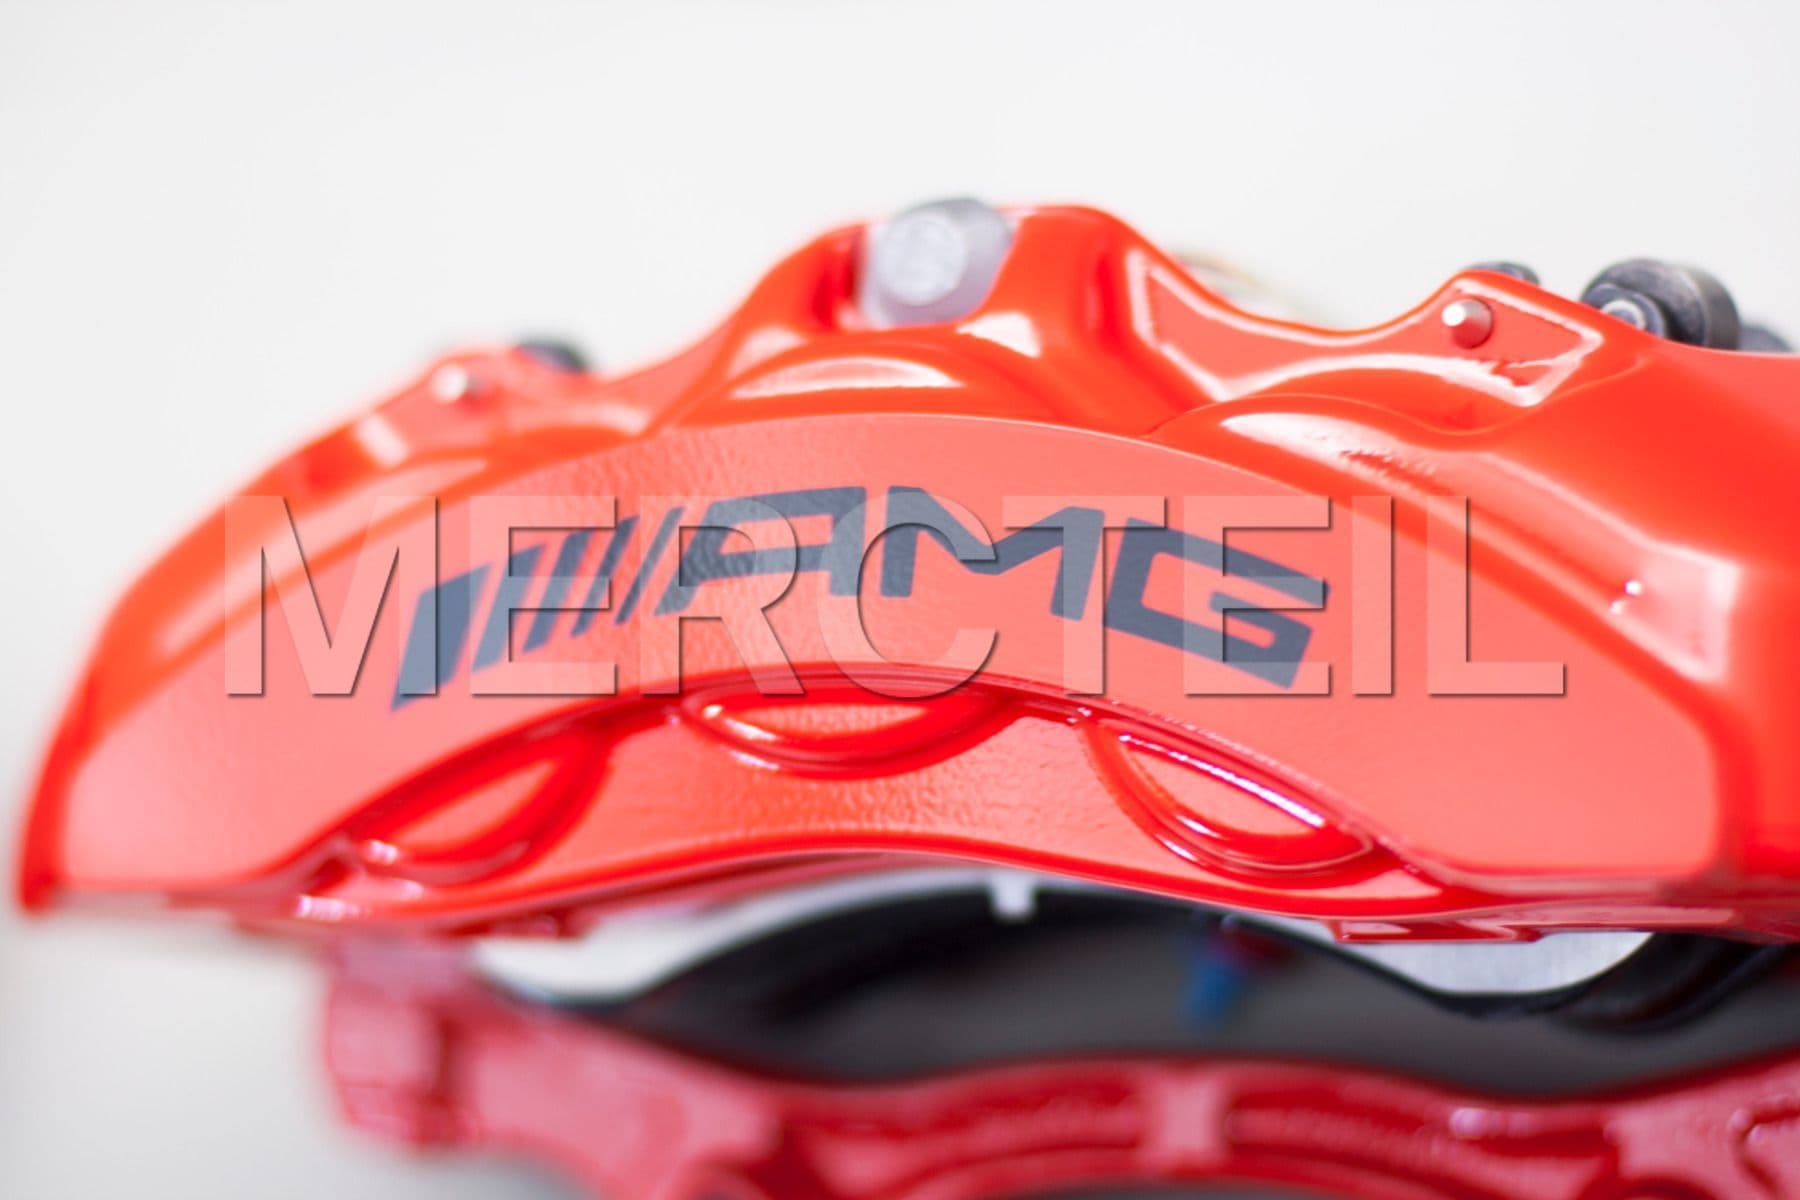 GLE63s AMG Red Brake System for GLE Coupe